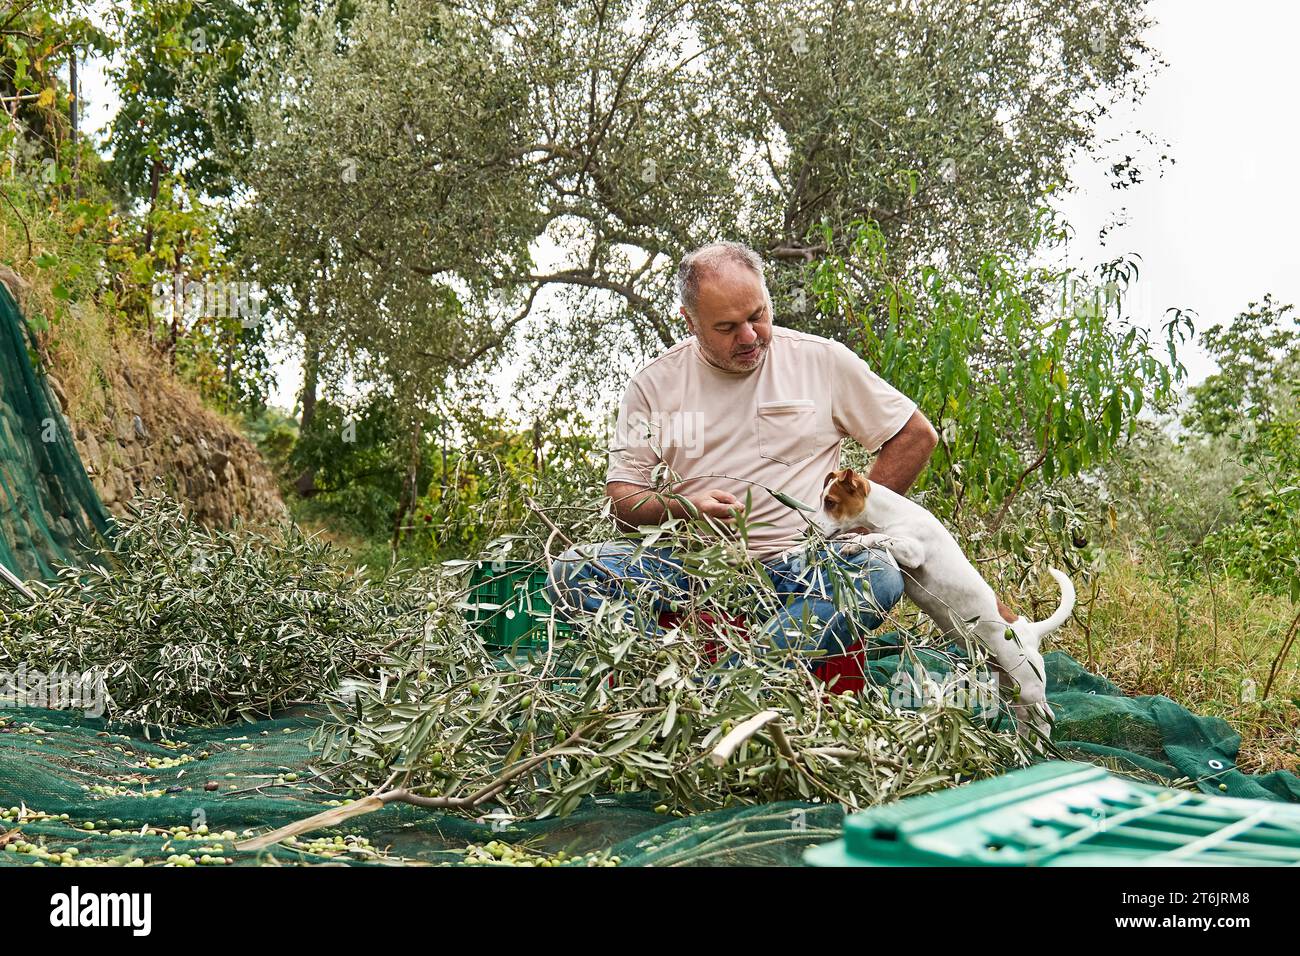 Gardener mature man picking olives and training his adorable curious jack russell terrier dog during olives harvesting works in countryside in orchard Stock Photo